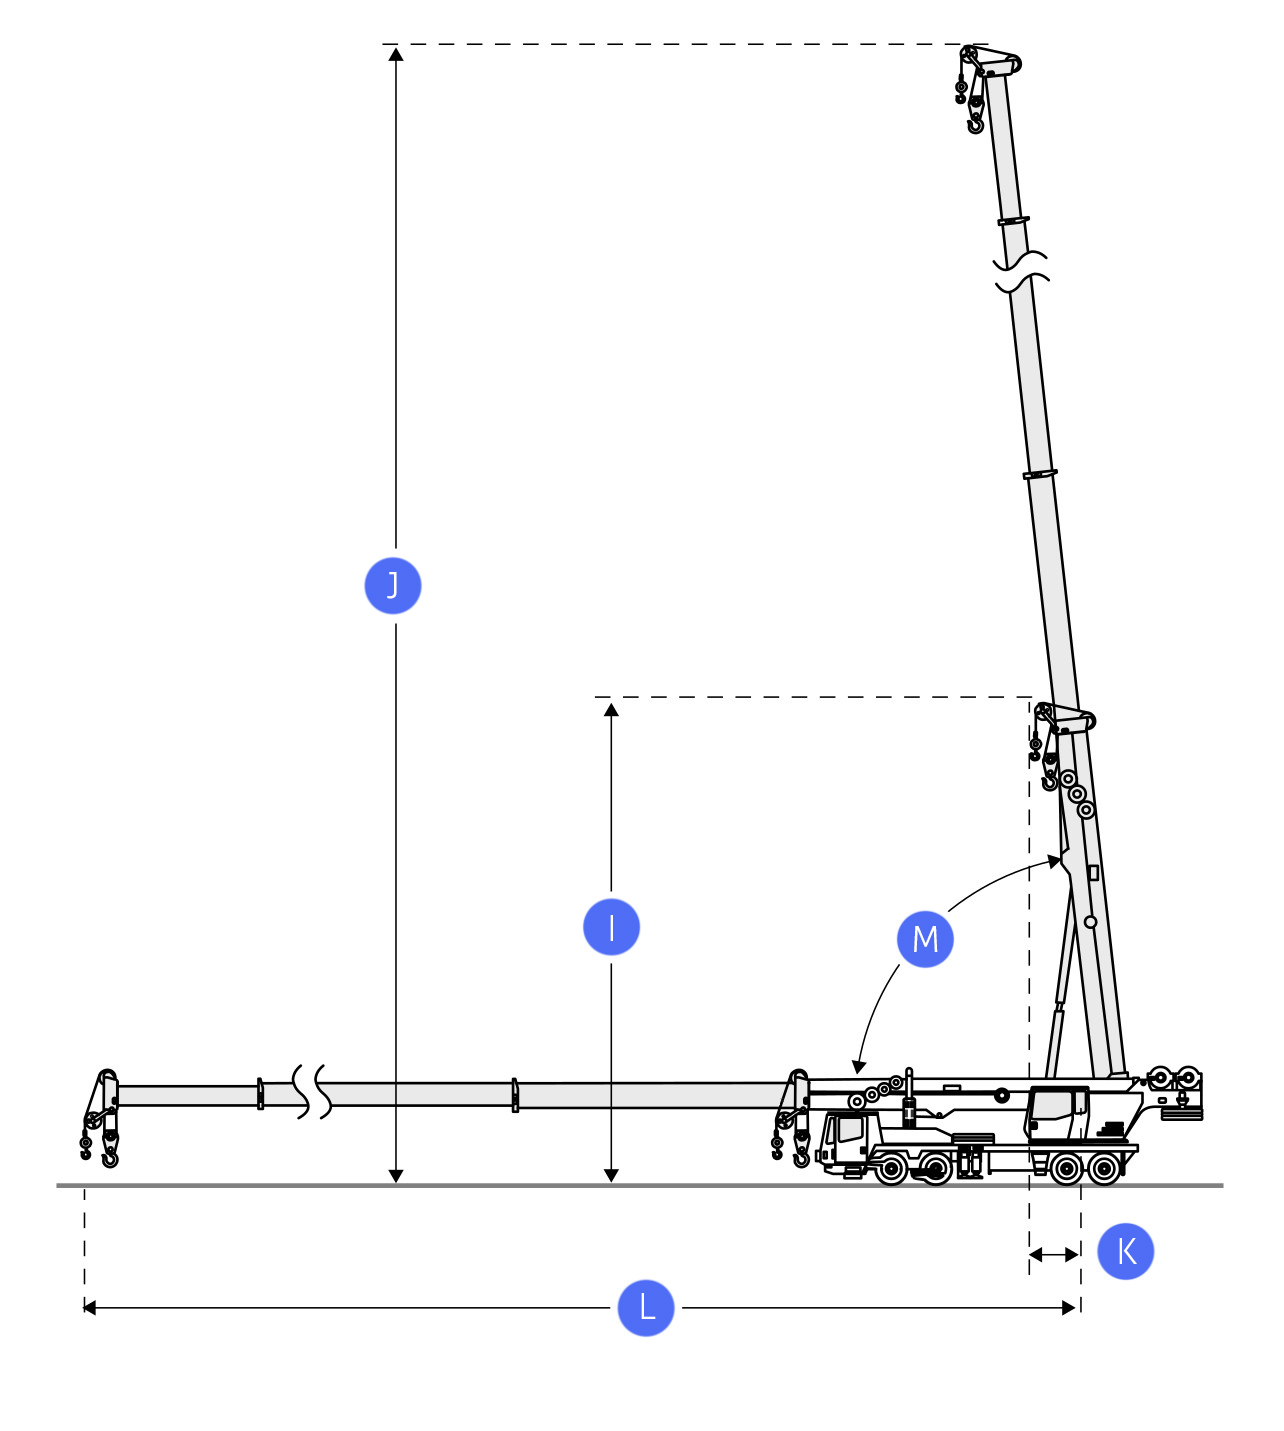 Picture of a Zoomlion QY70V523 Hydraulic Truck Crane